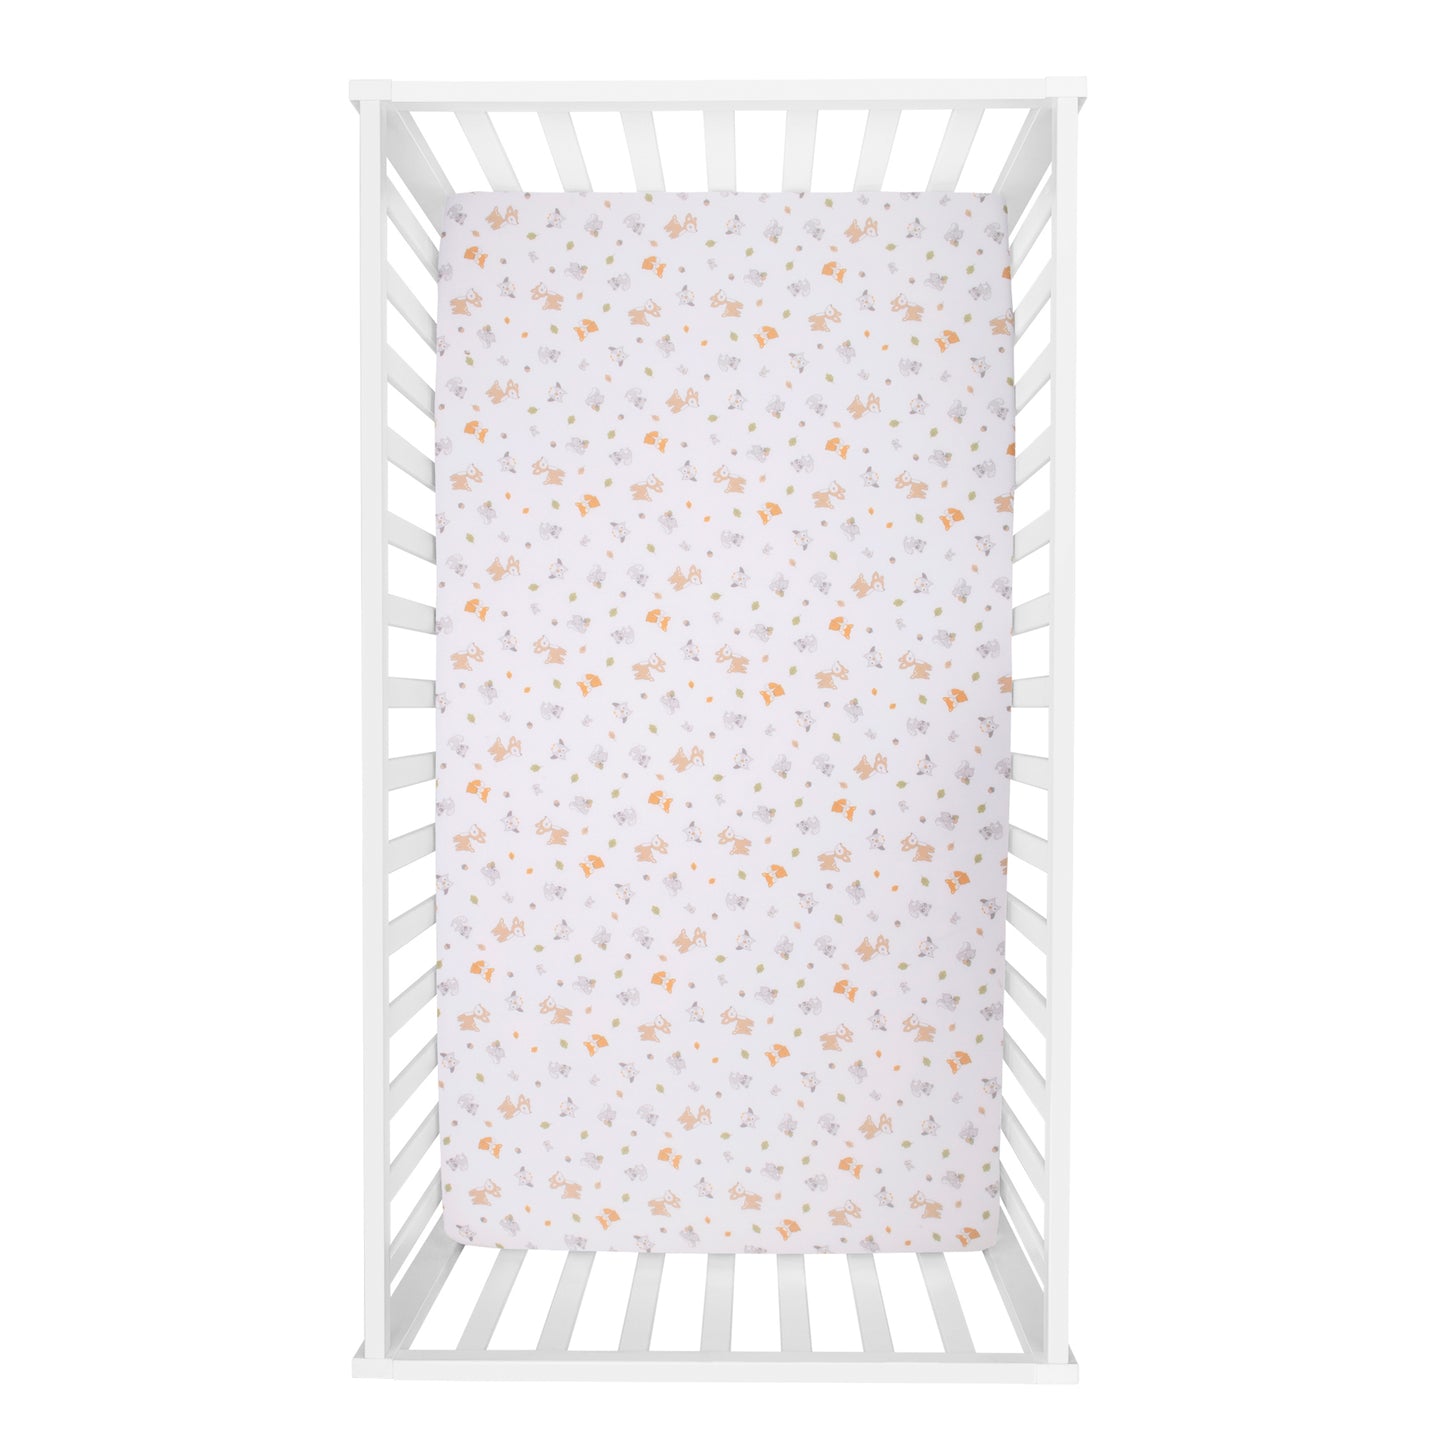 Friendly Forest 4 Piece Crib Bedding Collection by Sammy & Lou®; overhead view crib sheet